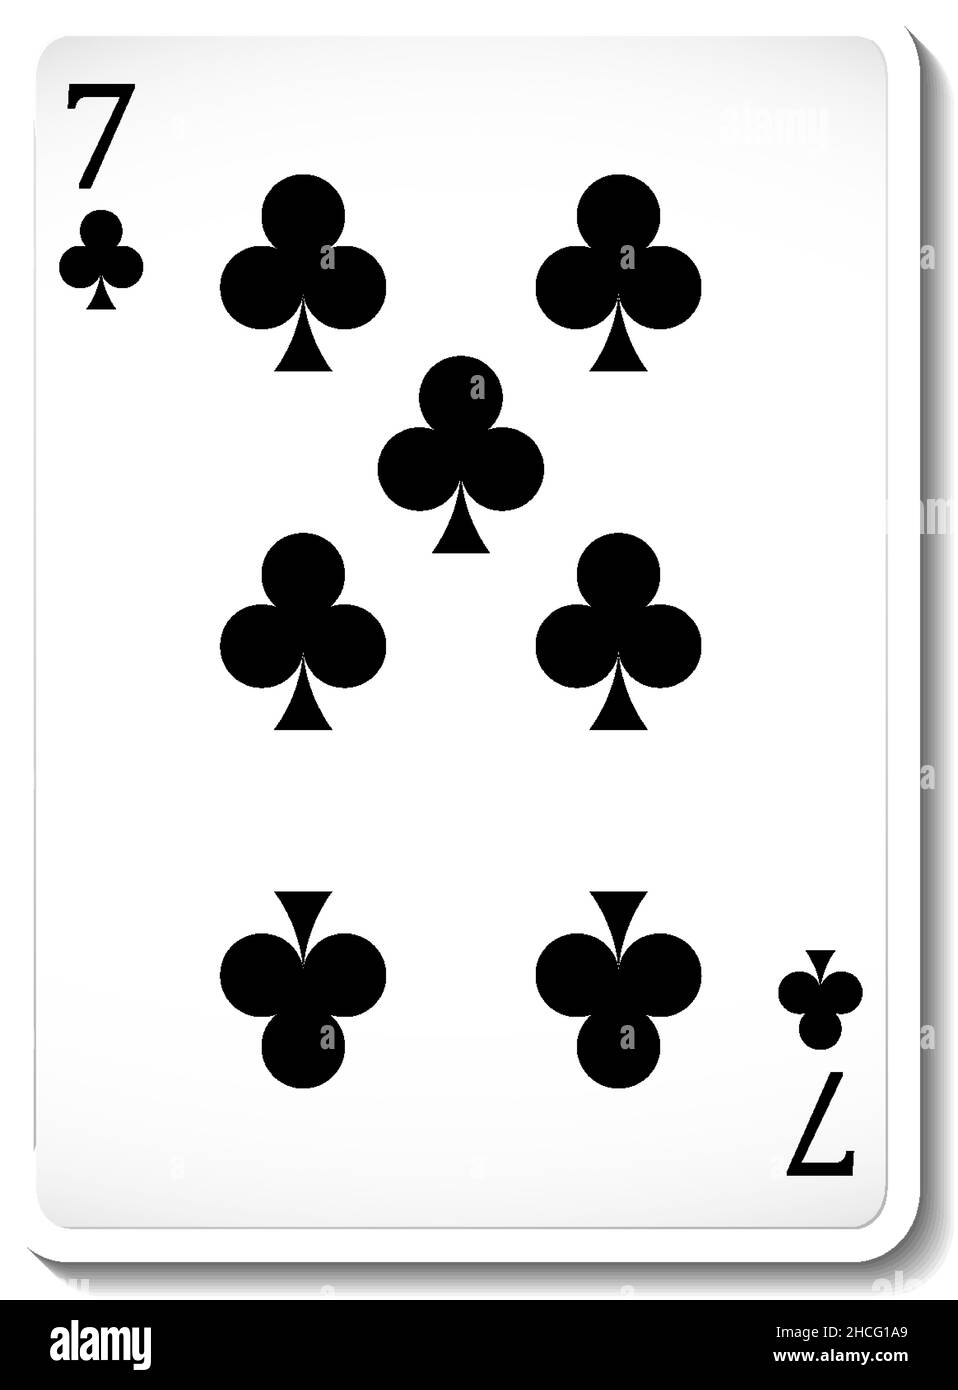 Seven of Clubs Playing Card Isolated illustration Stock Vector